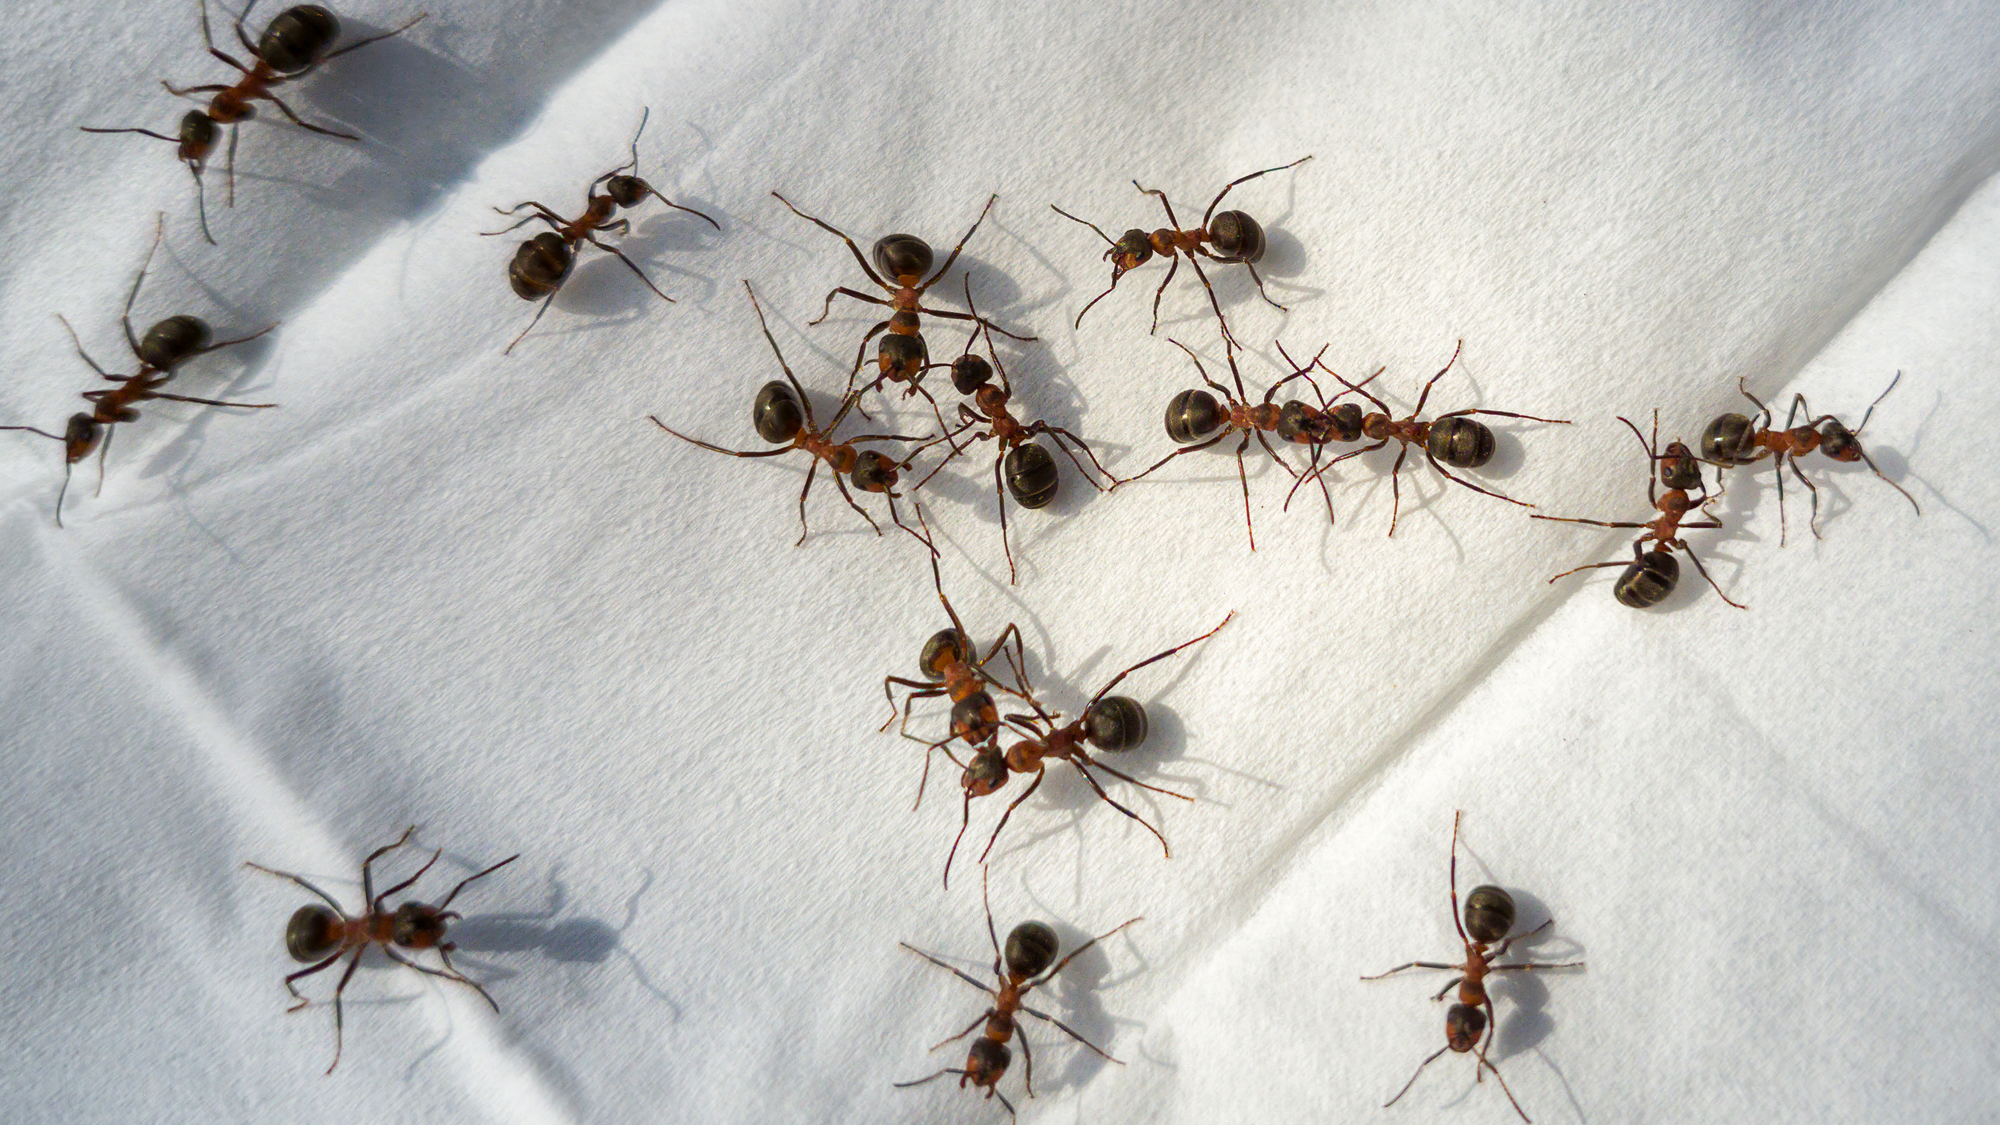  The Week contest: Ant doctors 